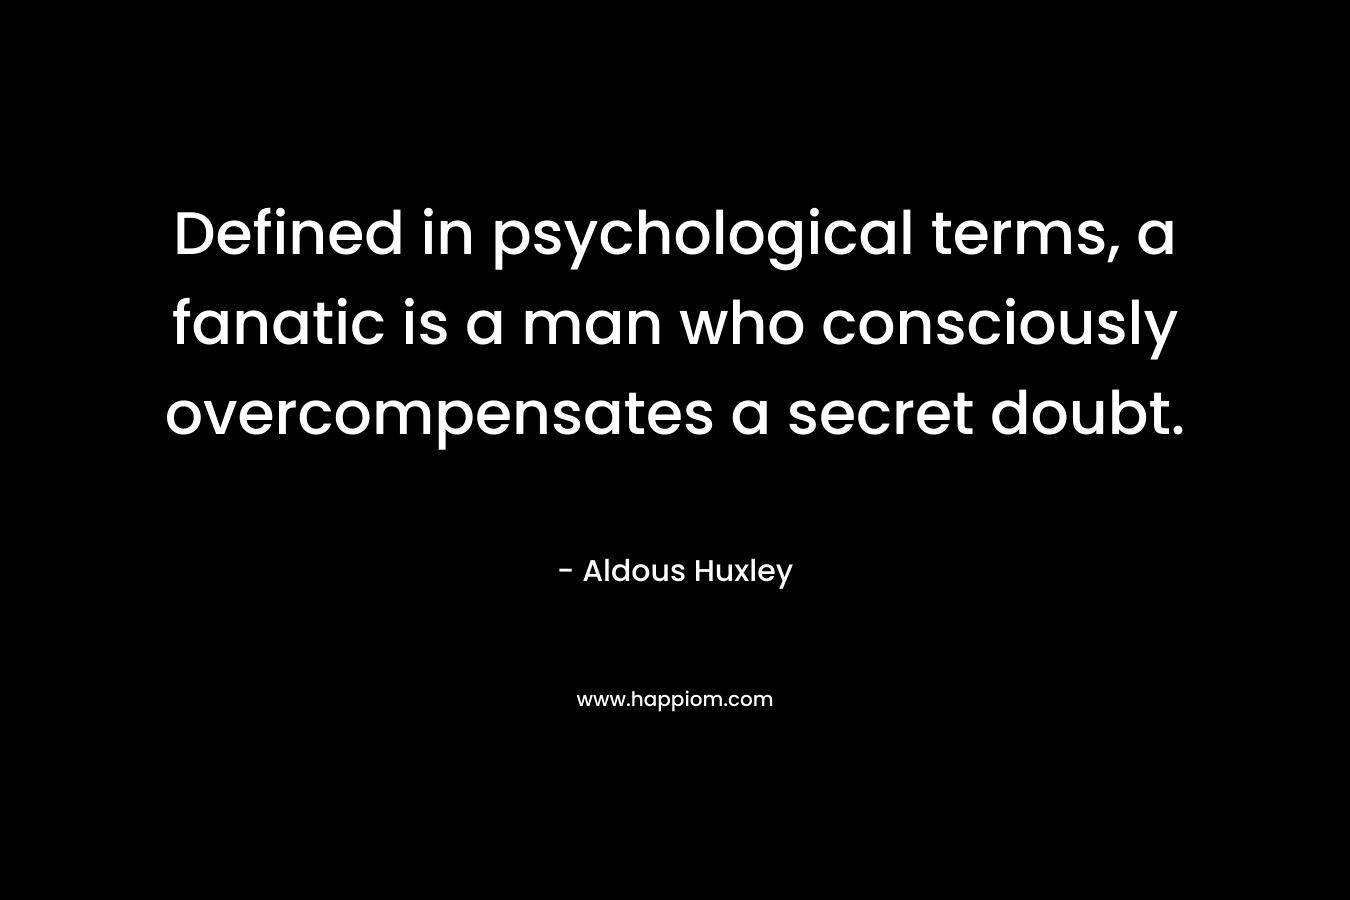 Defined in psychological terms, a fanatic is a man who consciously overcompensates a secret doubt. – Aldous Huxley